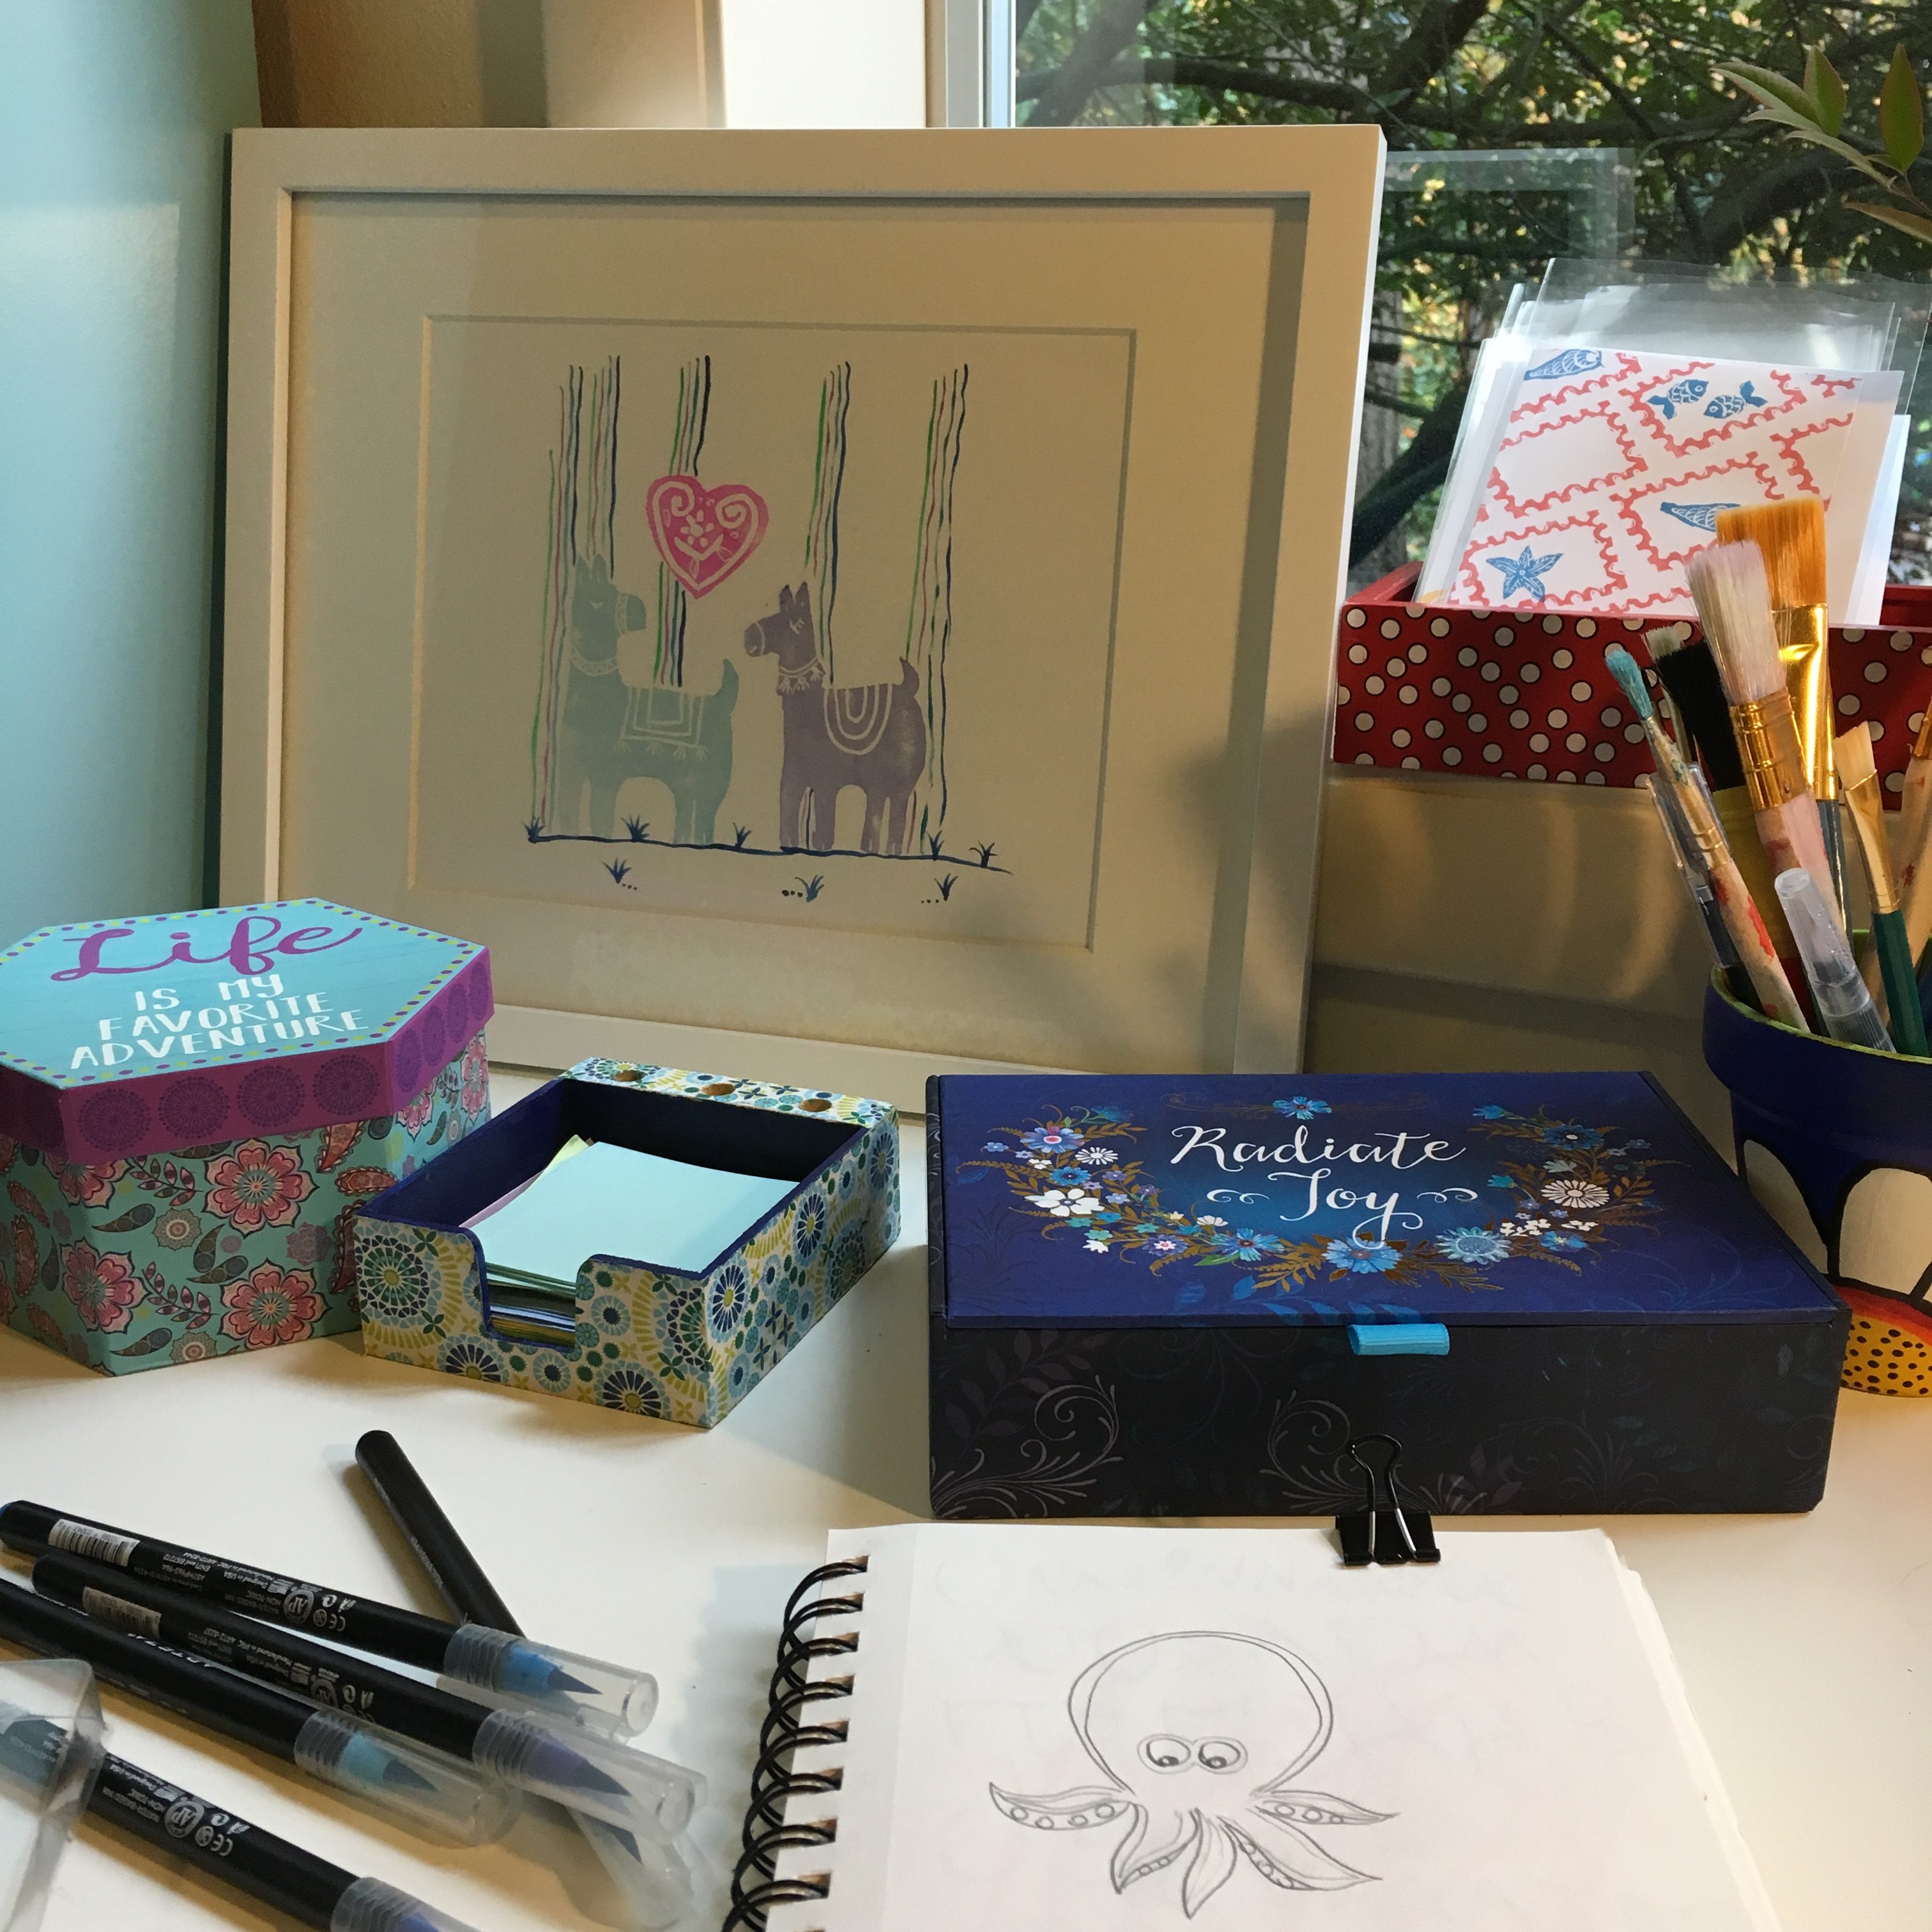 stamp containers, notes, brushes cards and a cute llama print